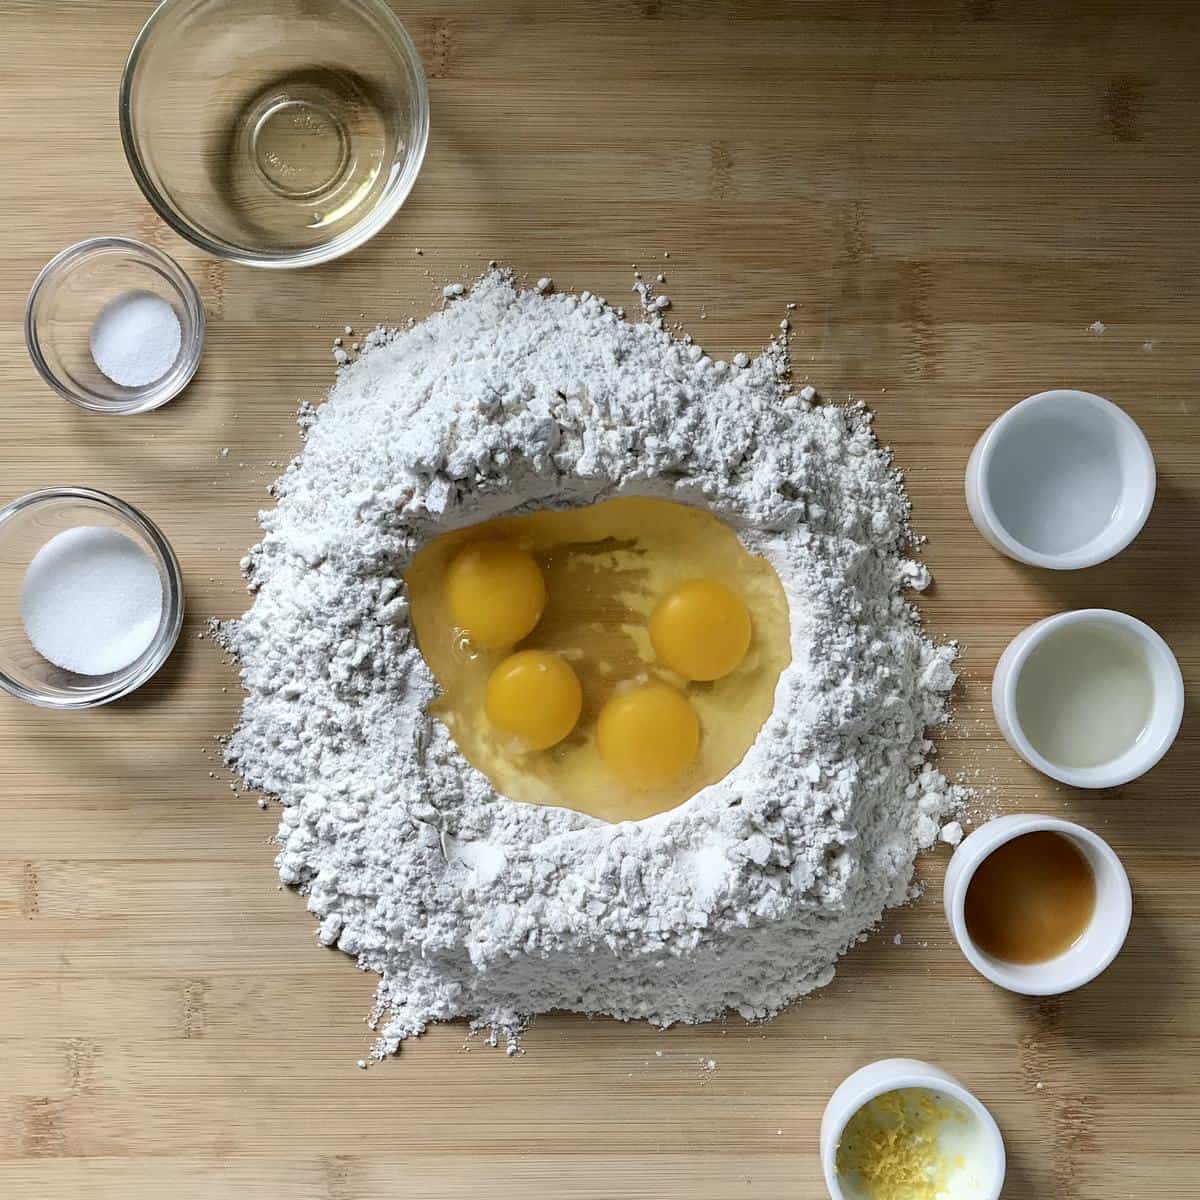 Eggs inside a flour well, surrounded by the rest of the ingredients to make a struffoli recipe.